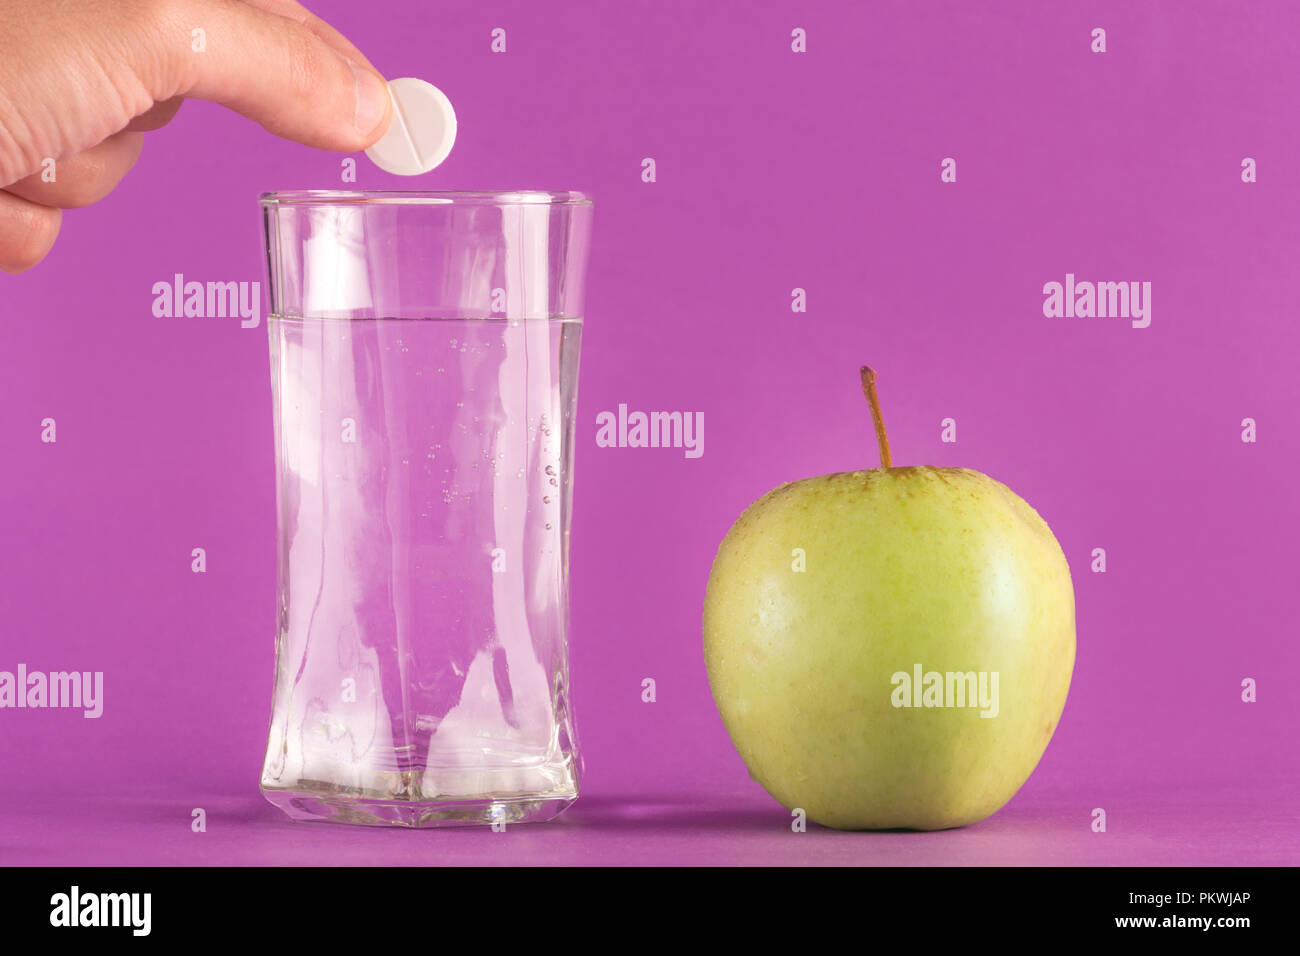 Hand throwing effervescent tablet vitamin mineral supplement into glass of water and green apple isolated on purple background. Health and medical Stock Photo